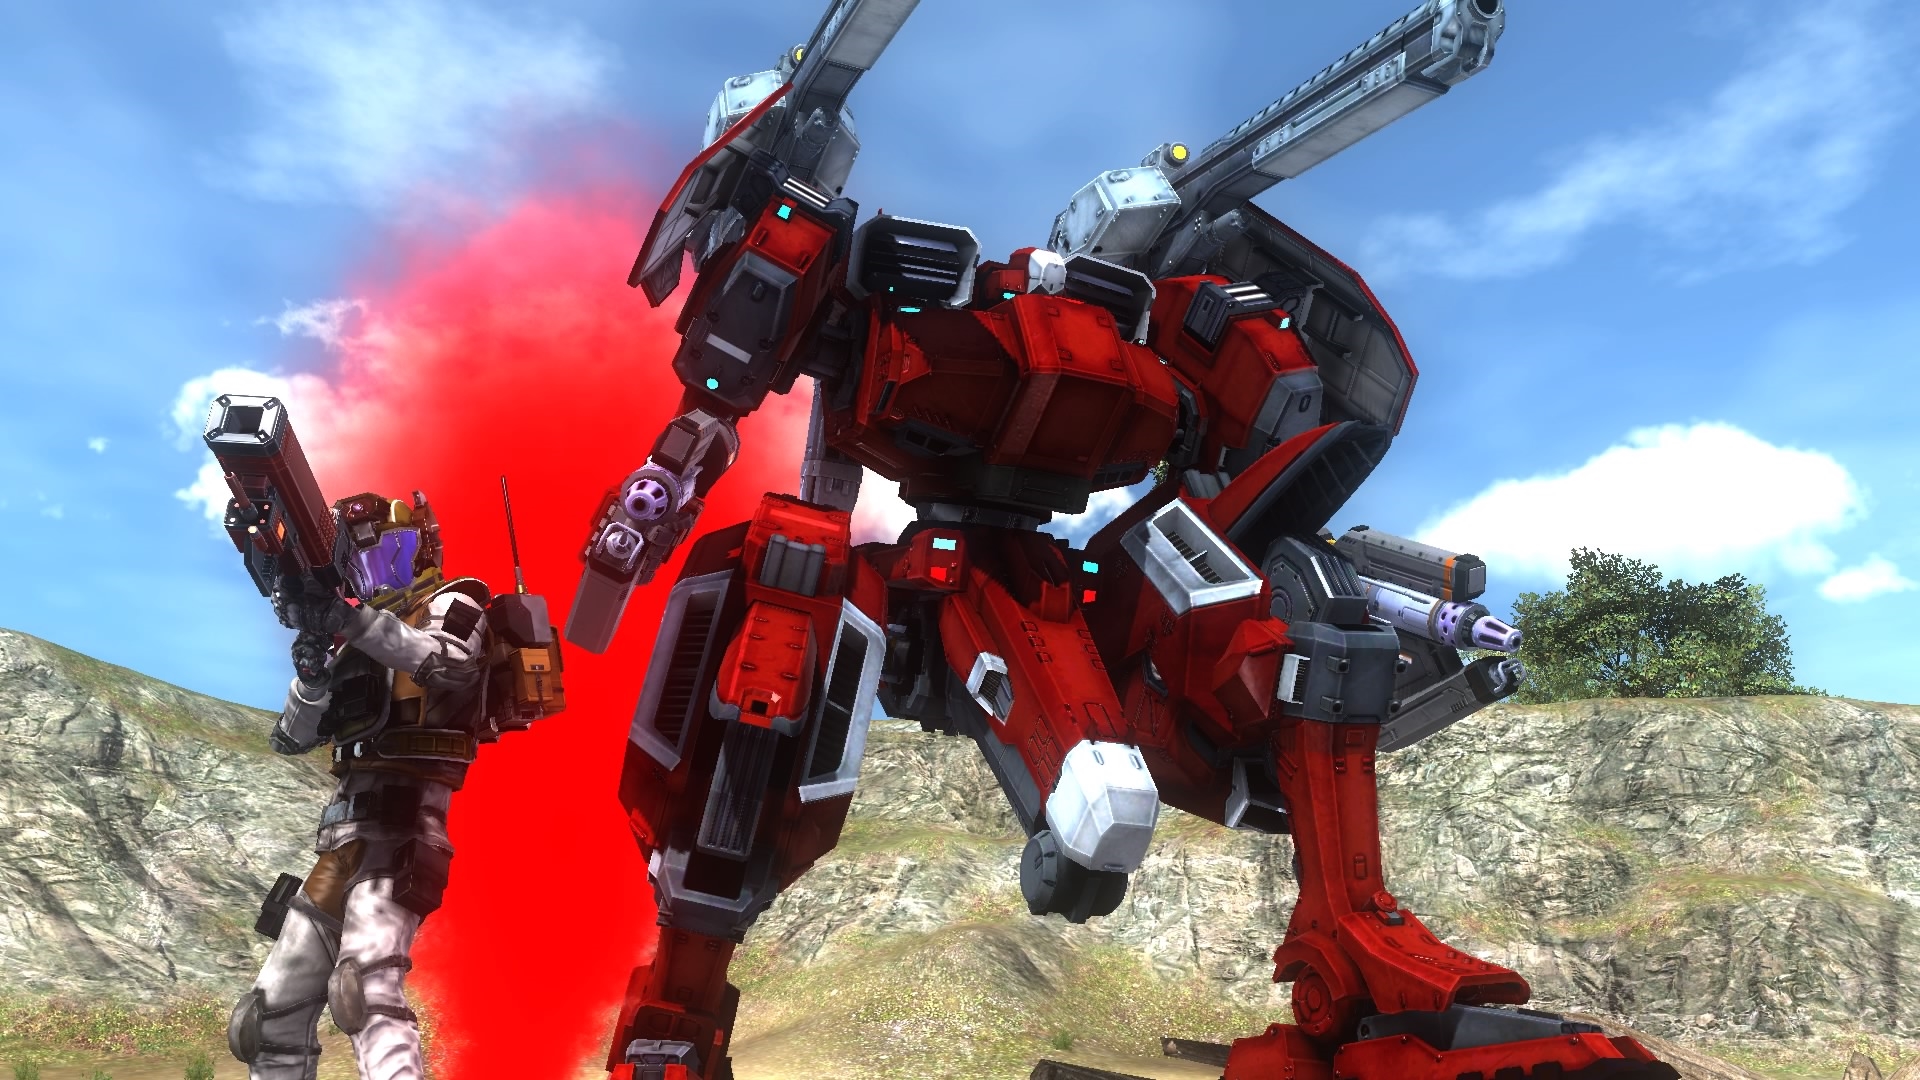 Earth Defense Force Has Bee The Best Selling Entry In Japan